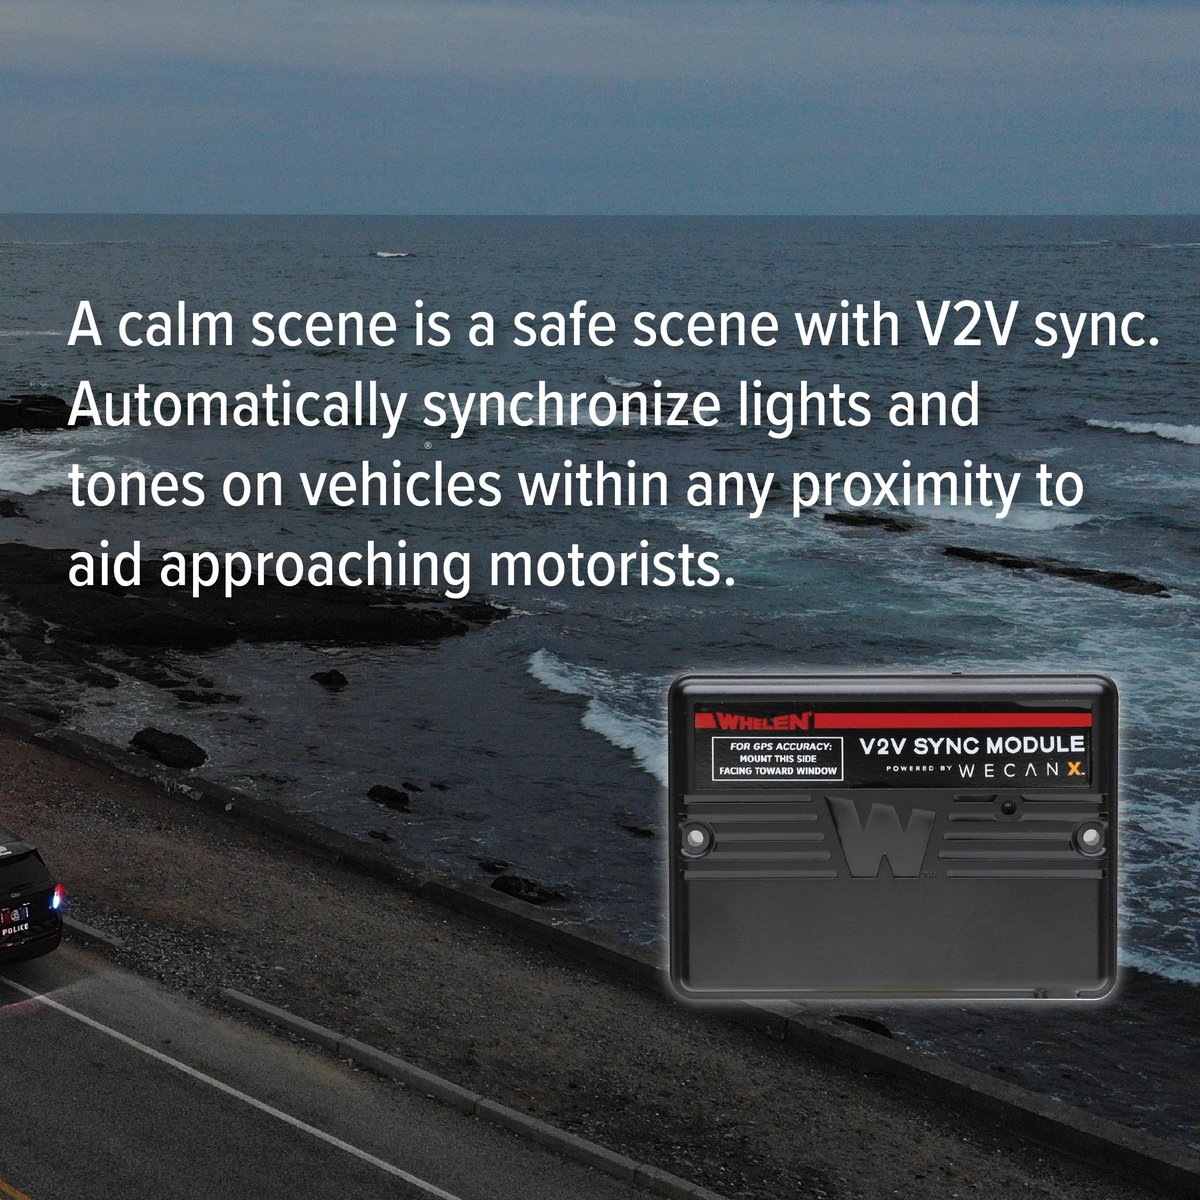 Our V2V Sync is made possible with Whelen’s Core™ control systems, allowing users to automatically synchronize lights and tones on vehicles within any proximity to aid approaching motorists. #WhelenEng #ManufacturedinAmerica